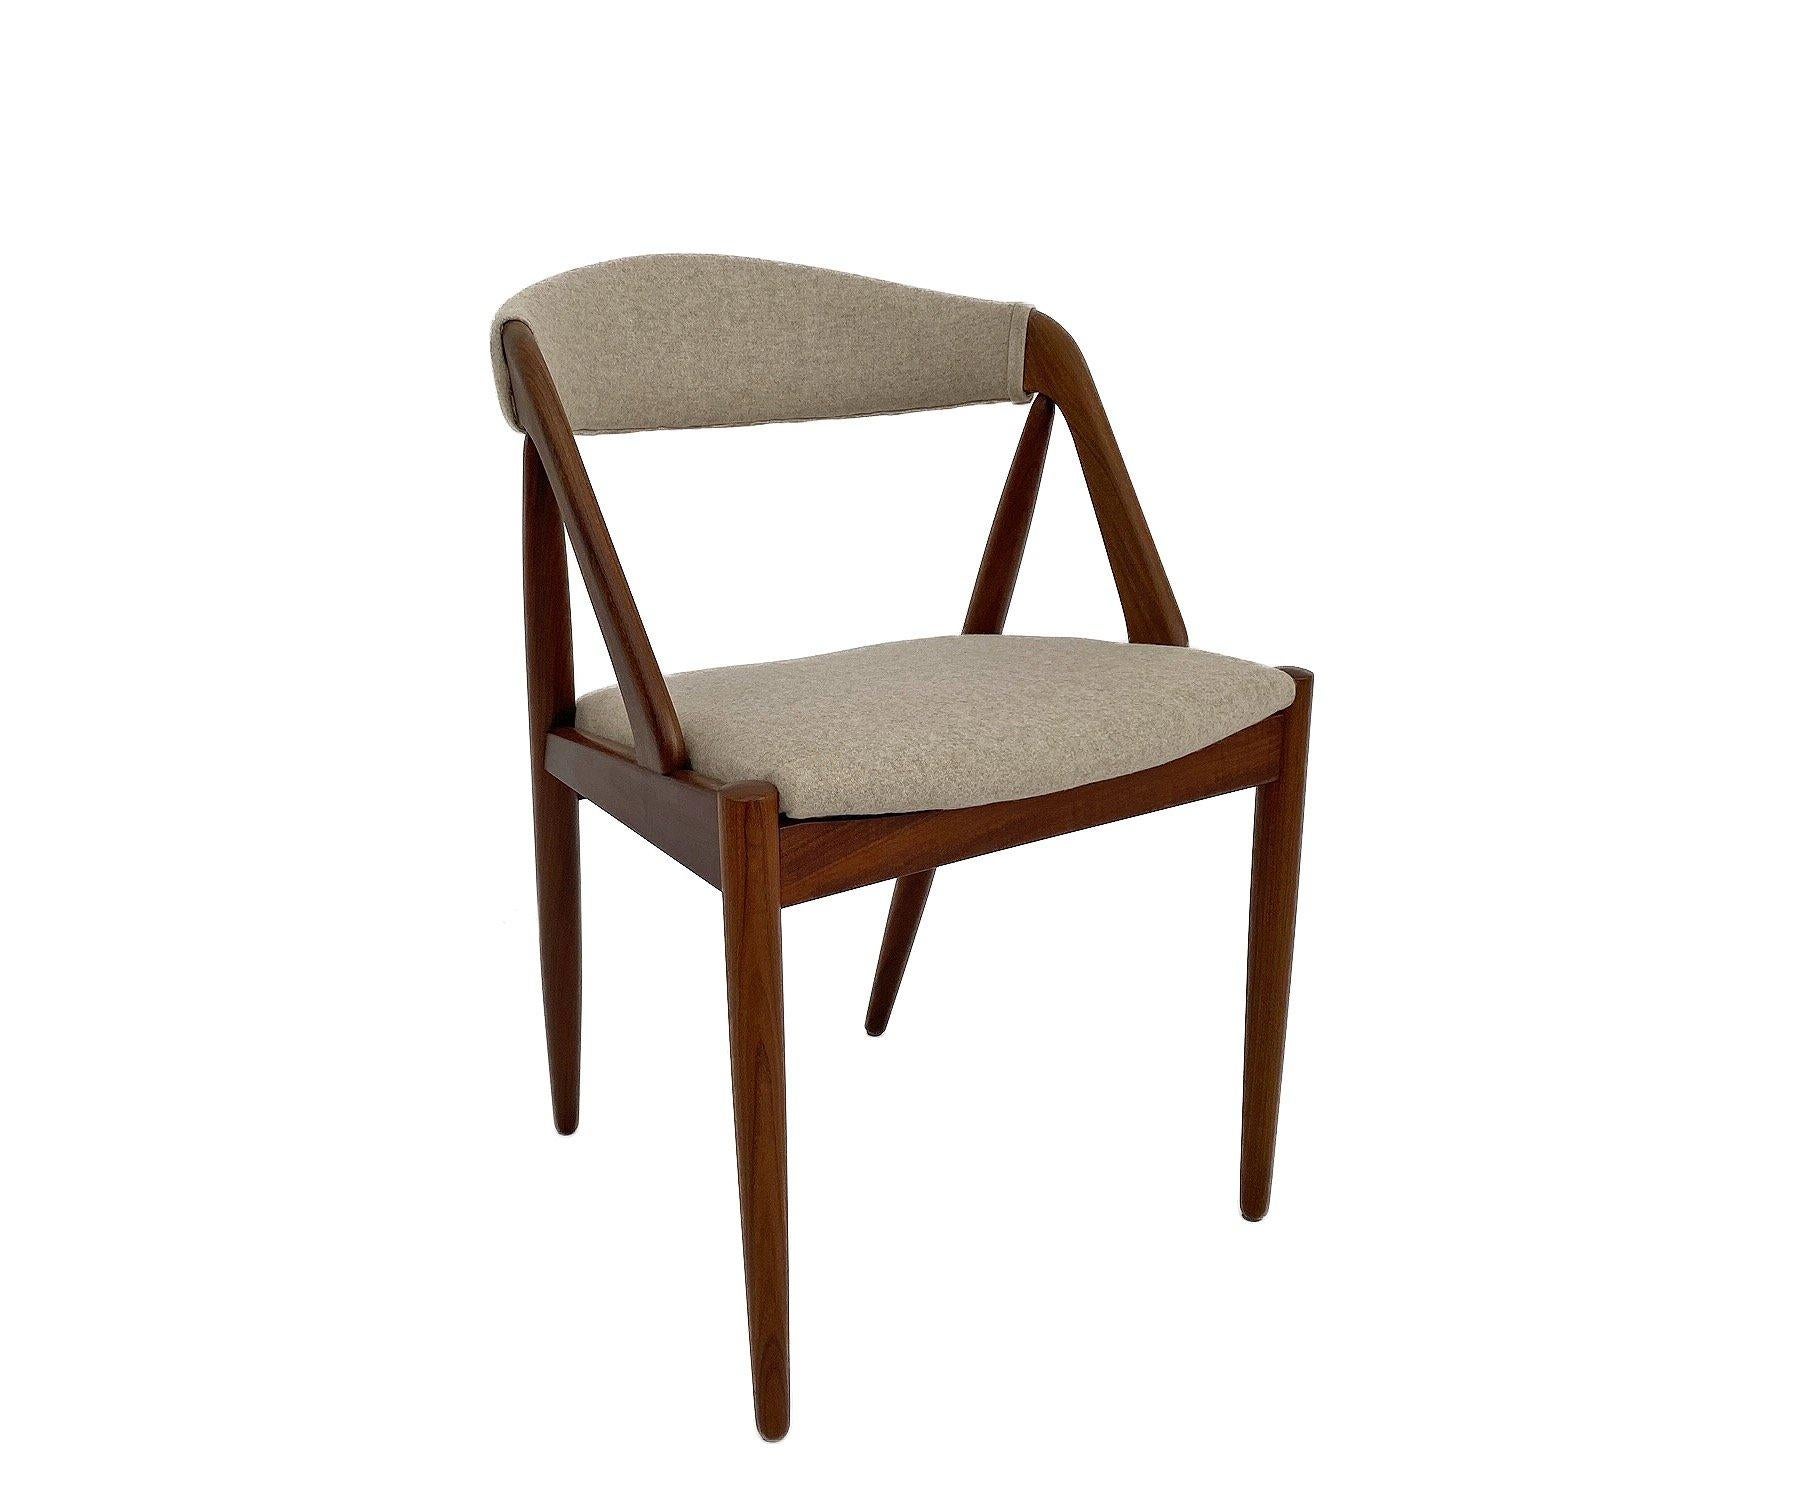 A beautiful Danish iconic Model 31 teak and cream wool desk/dining chair designed by Kai Kristiansen for Shou Andersen, this would make a stylish addition to any living or work area. A striking piece of classic Scandinavian furniture.

The chair